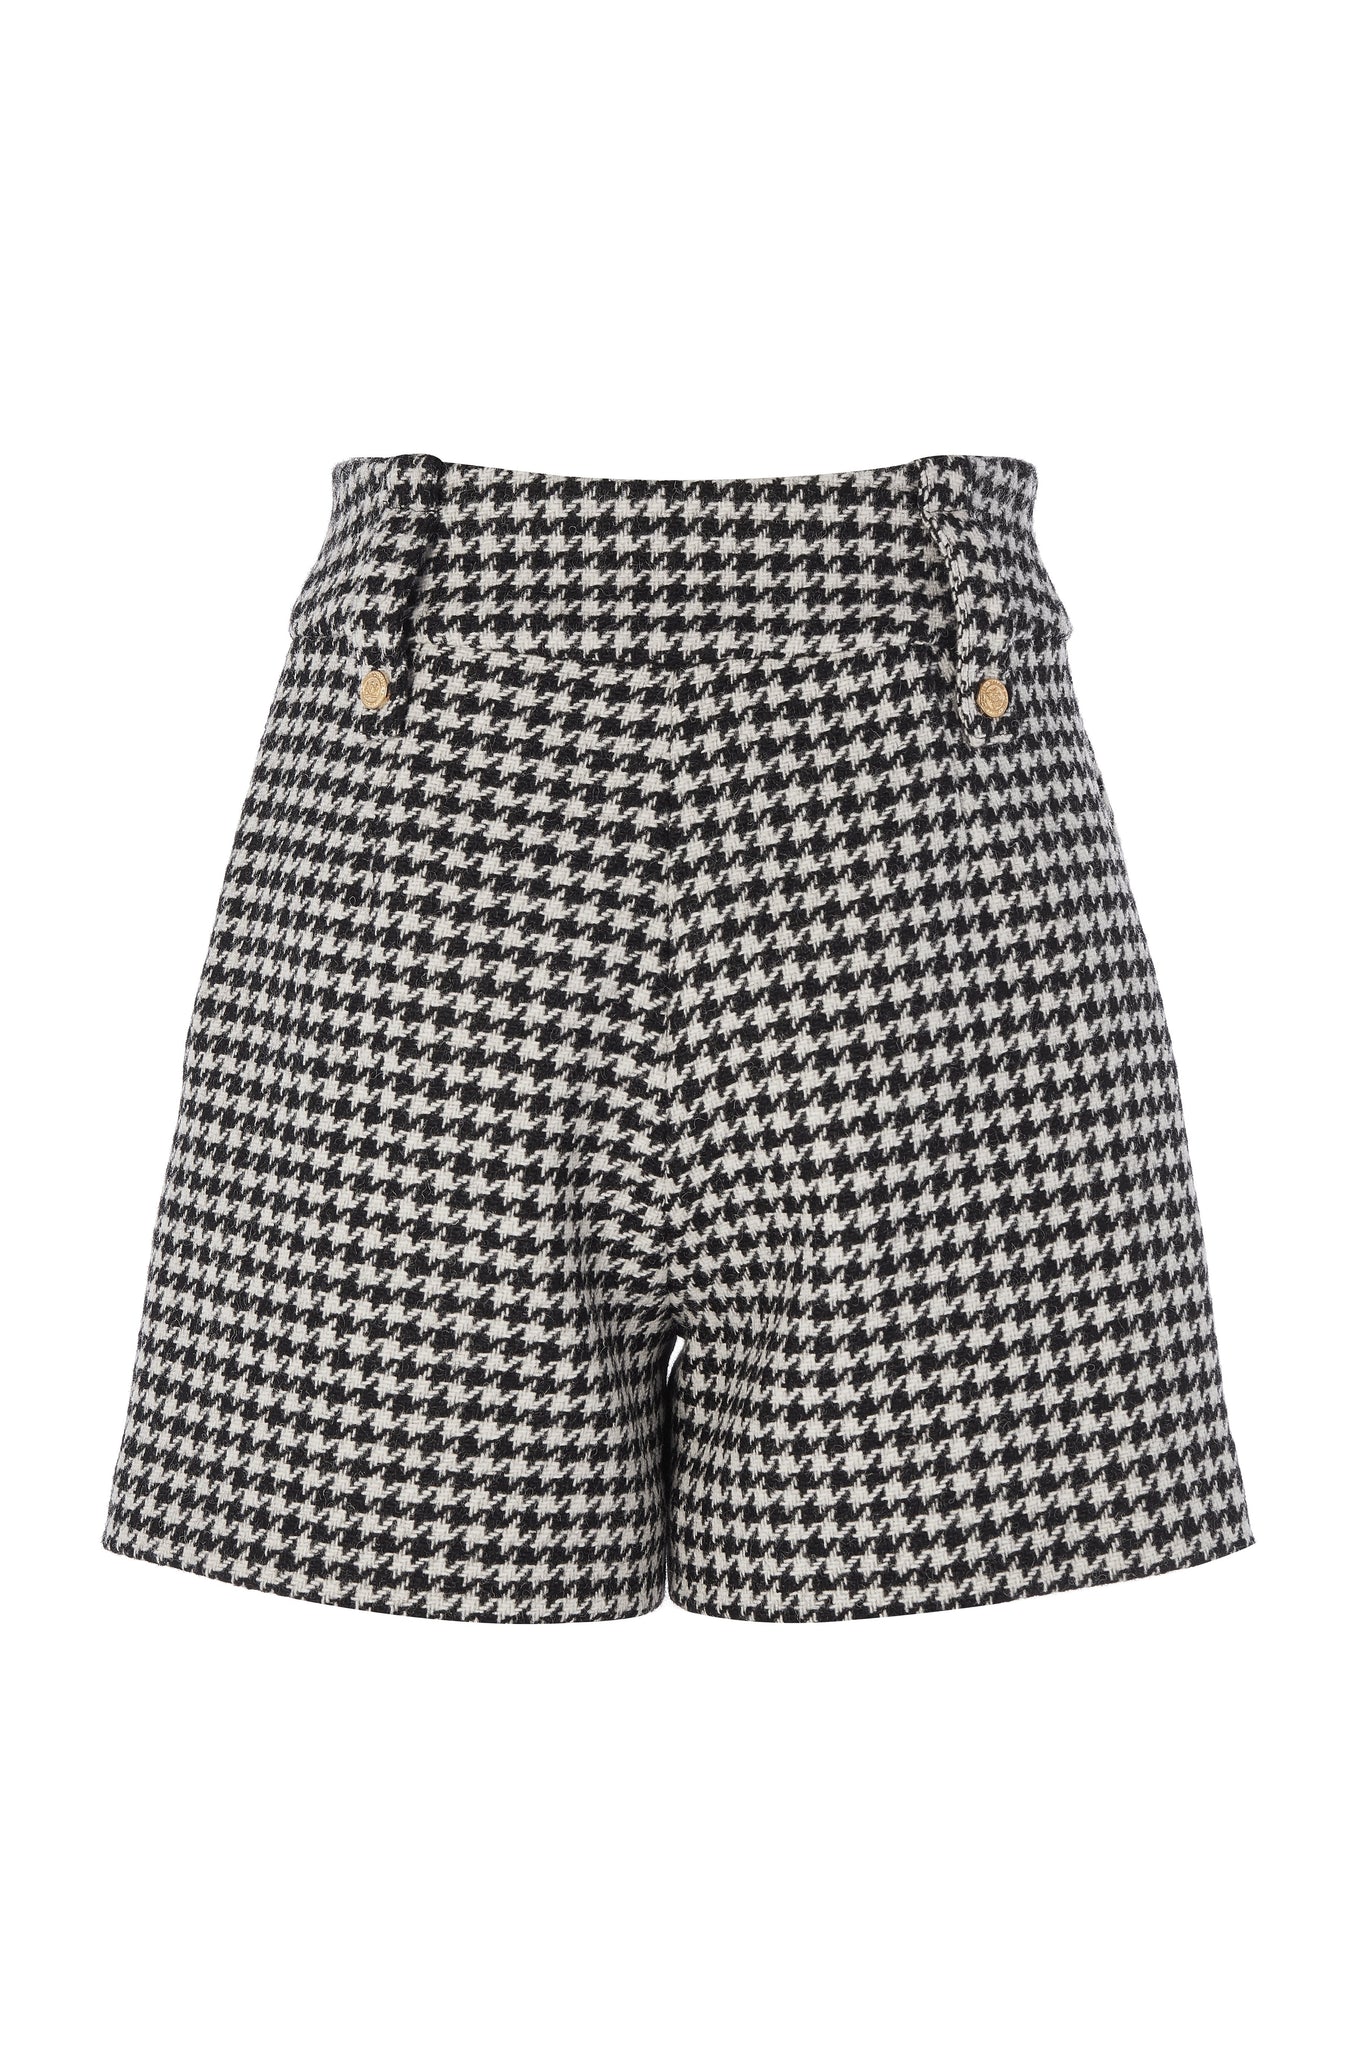 back of womens black and white houndstooth high rise tailored shorts with two single knife pleats and centre front zip fly fastening with twin branded gold stud buttons and side hip pockets with branded rivet detailing at top and bottom of pockets